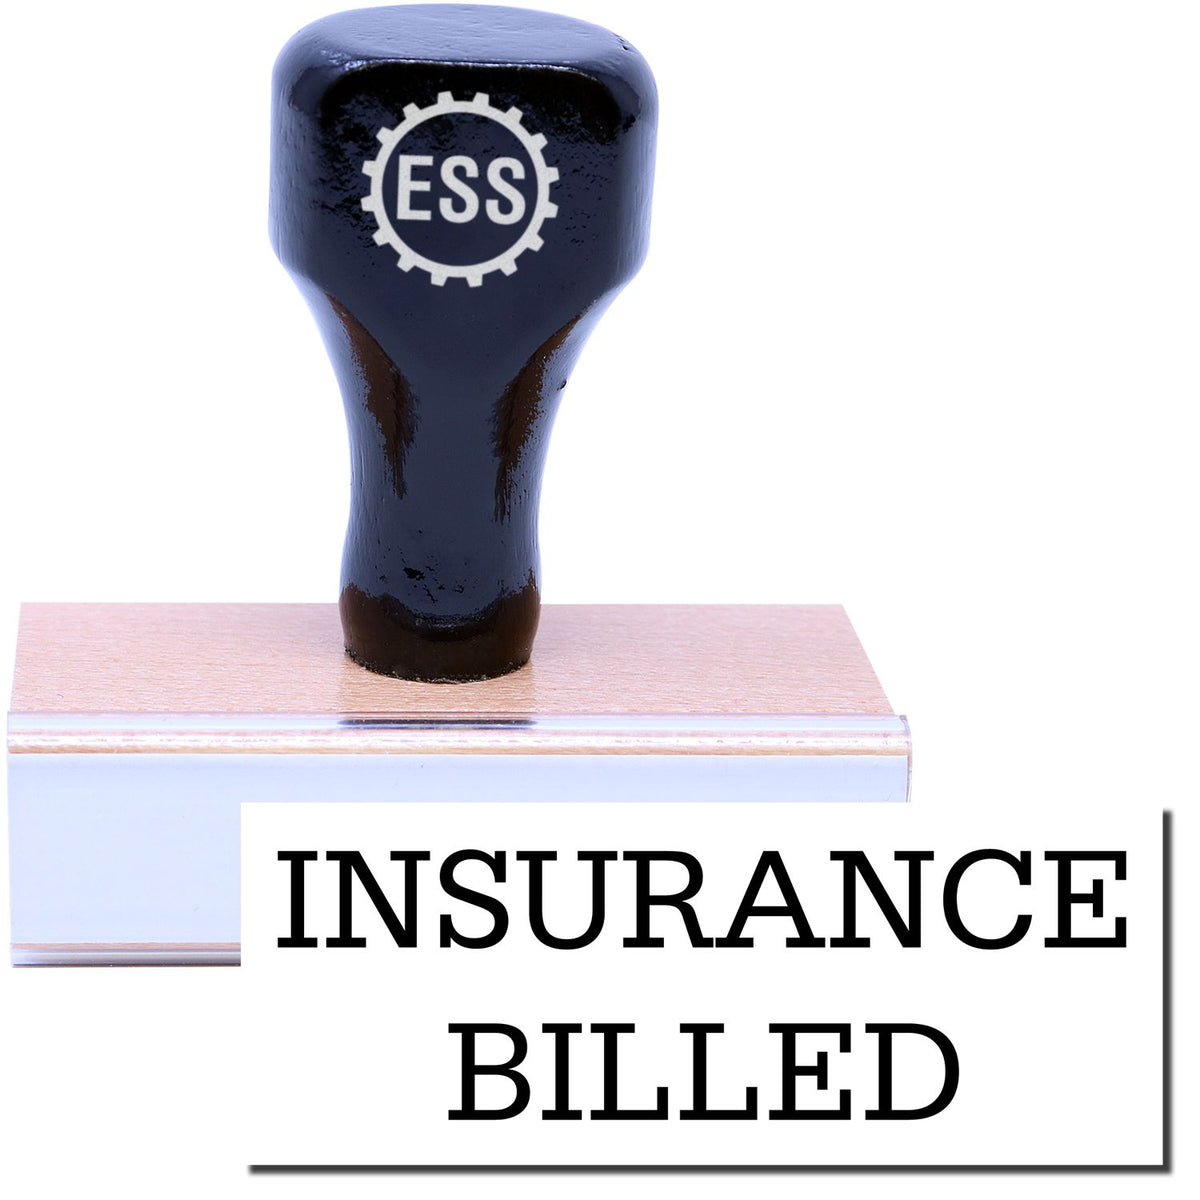 A stock office rubber stamp with a stamped image showing how the text &quot;INSURANCE BILLED&quot; in a large font is displayed after stamping.